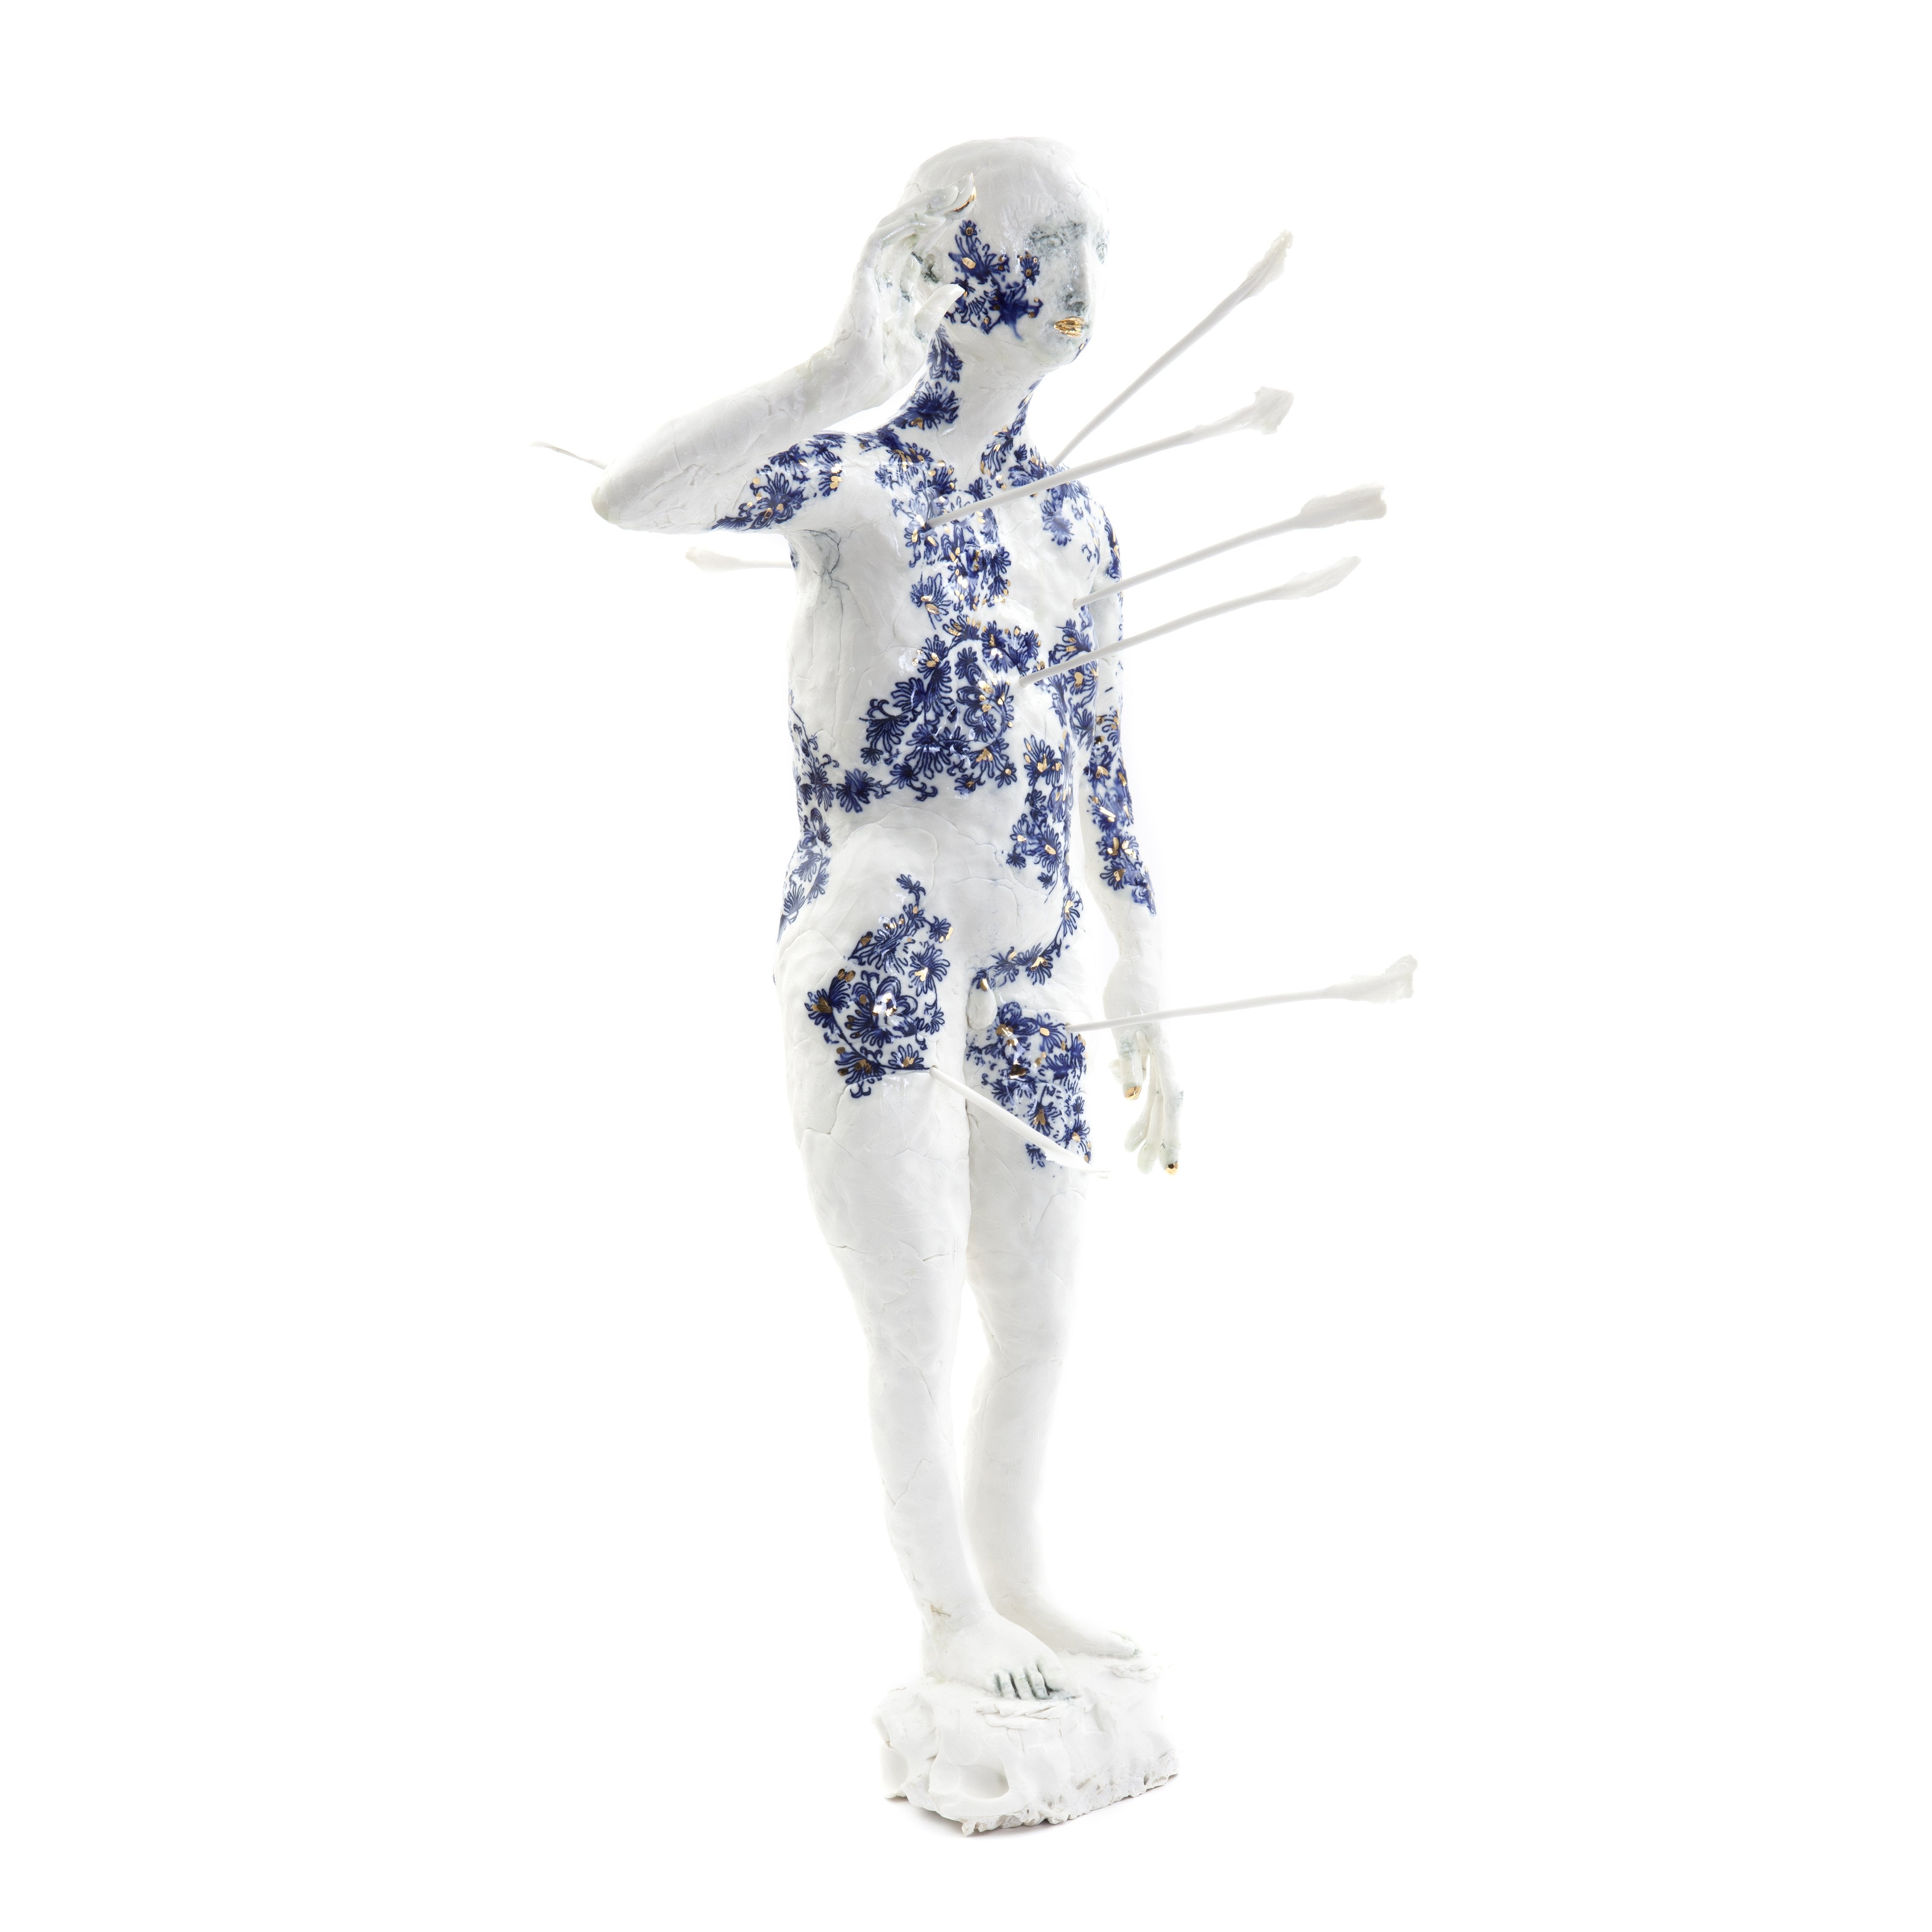 Claire Curneen, Over My Dead Body, Porcelain sculpture - ONEROOM